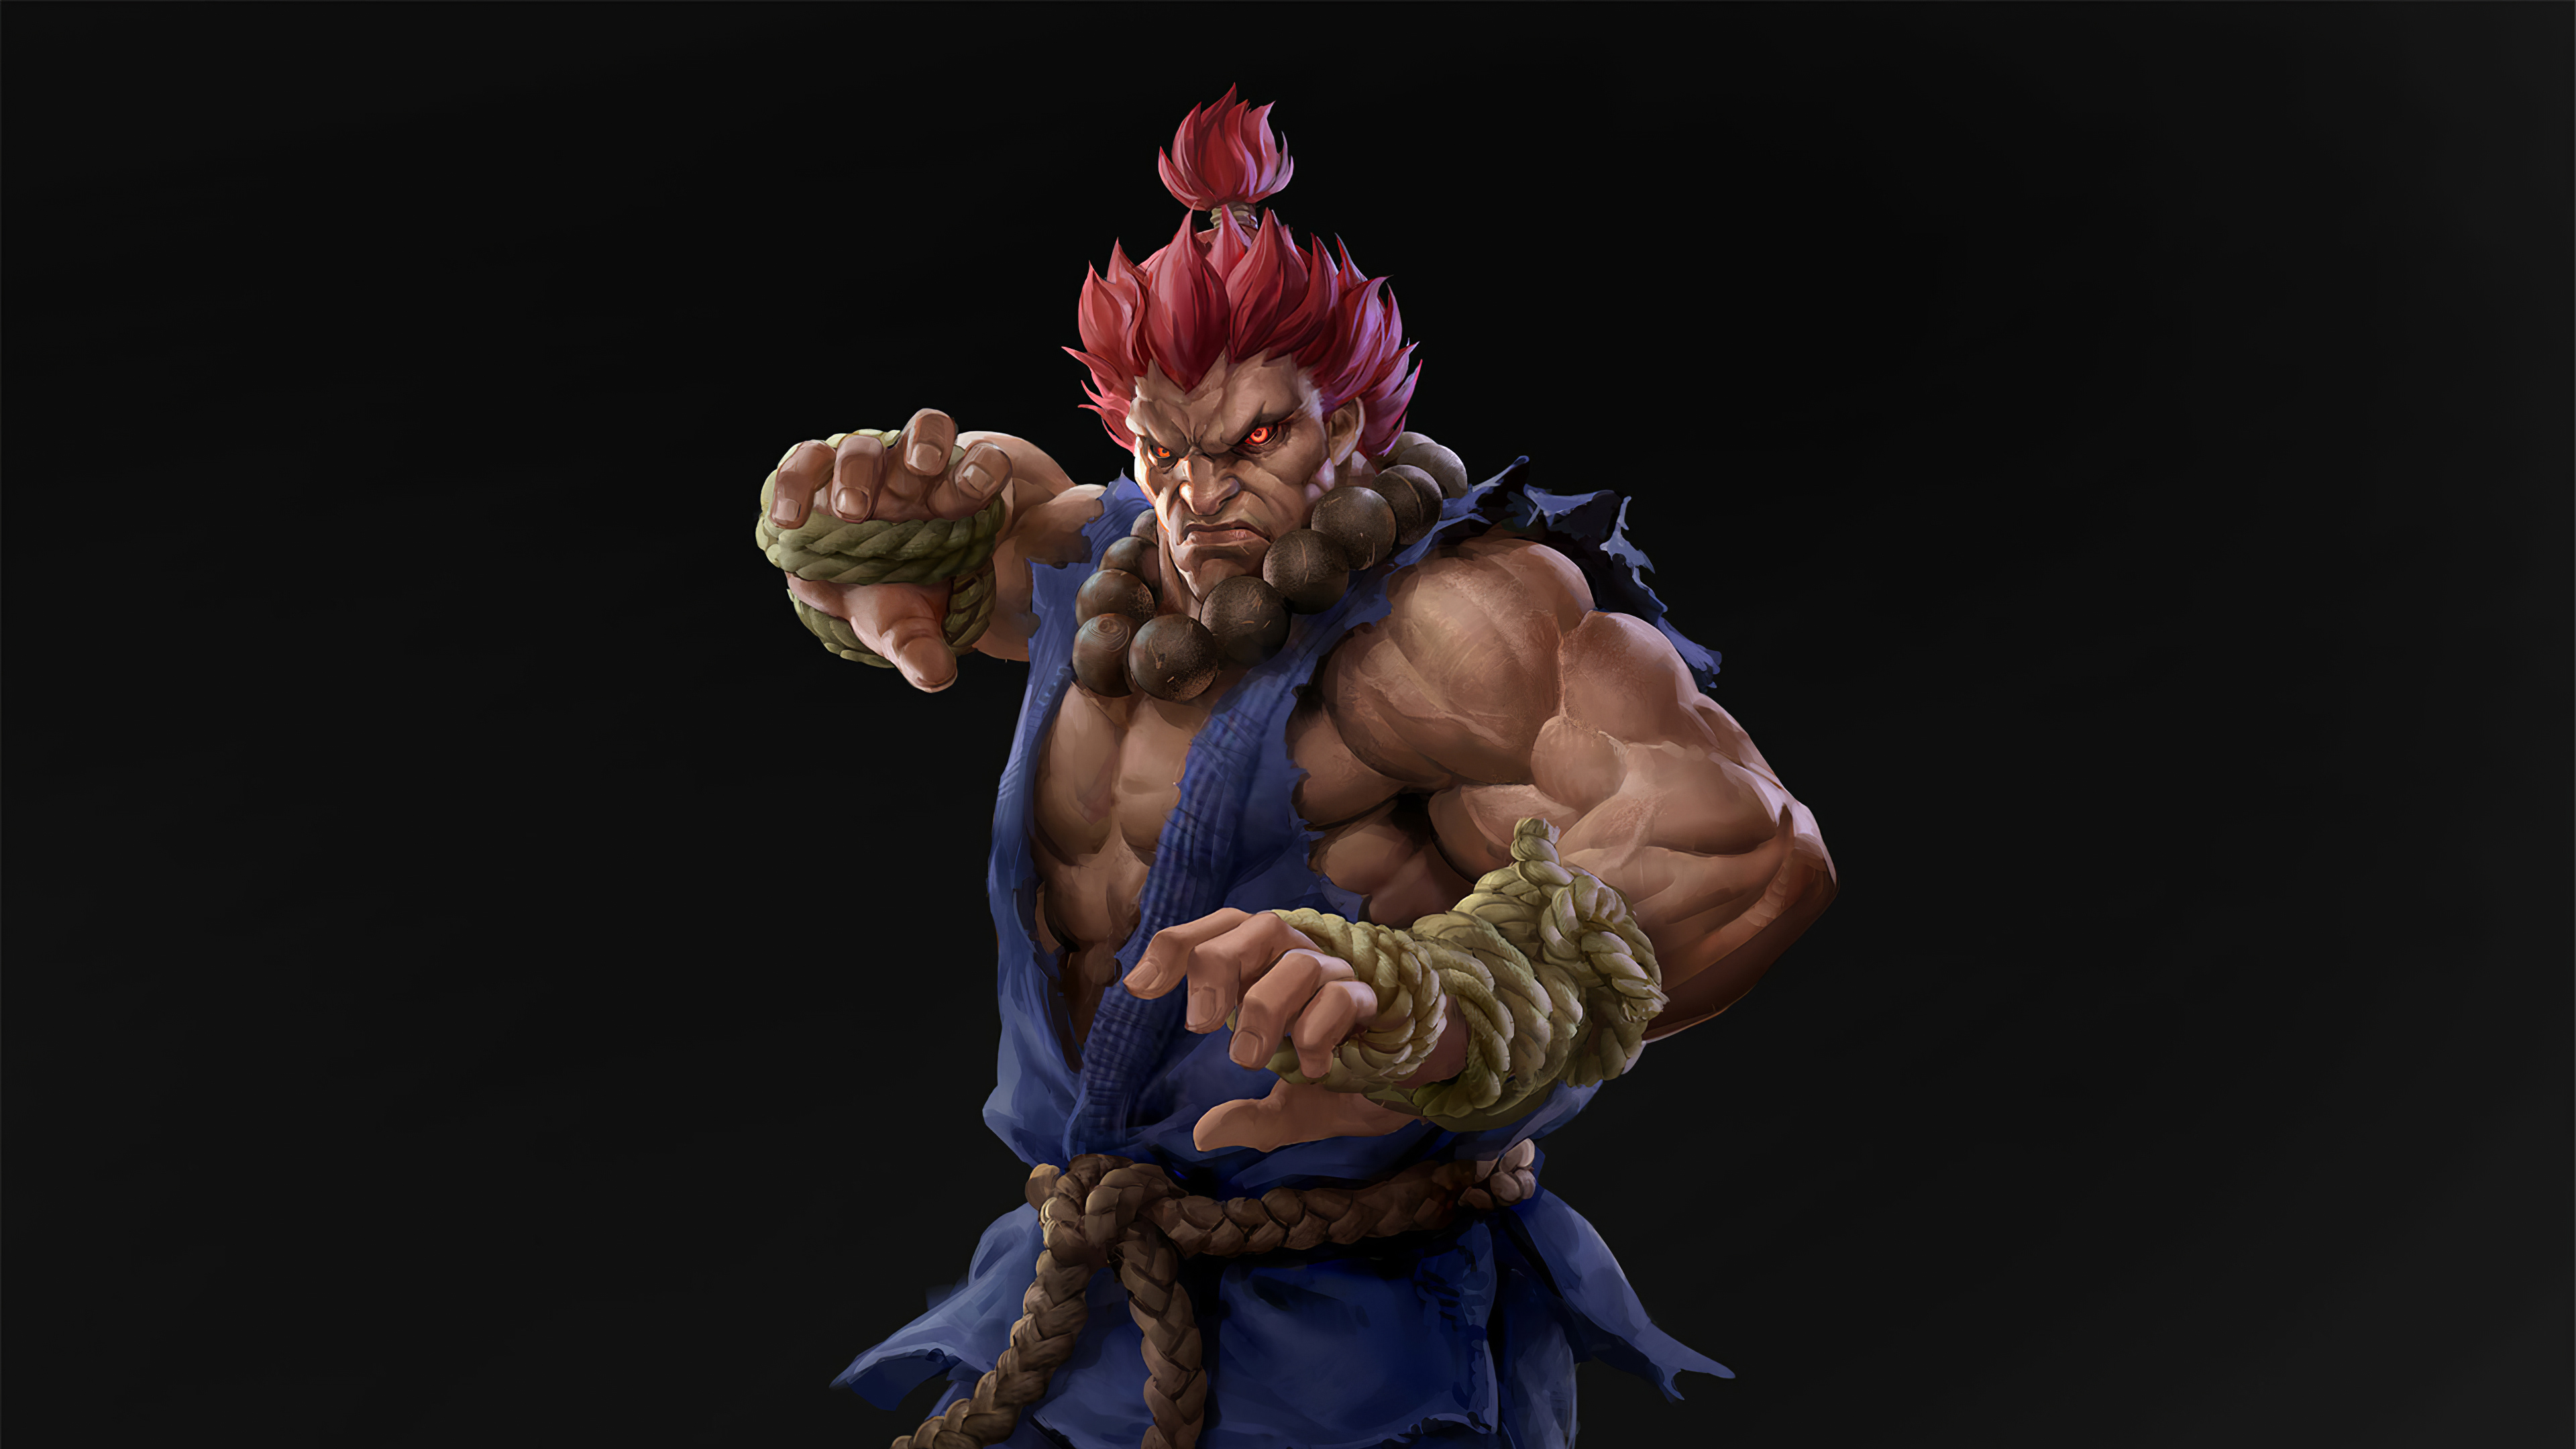 4k Akuma Street Fighter Artwork Hd Superheroes 4k Wallpapers Images Backgrounds Photos And Pictures